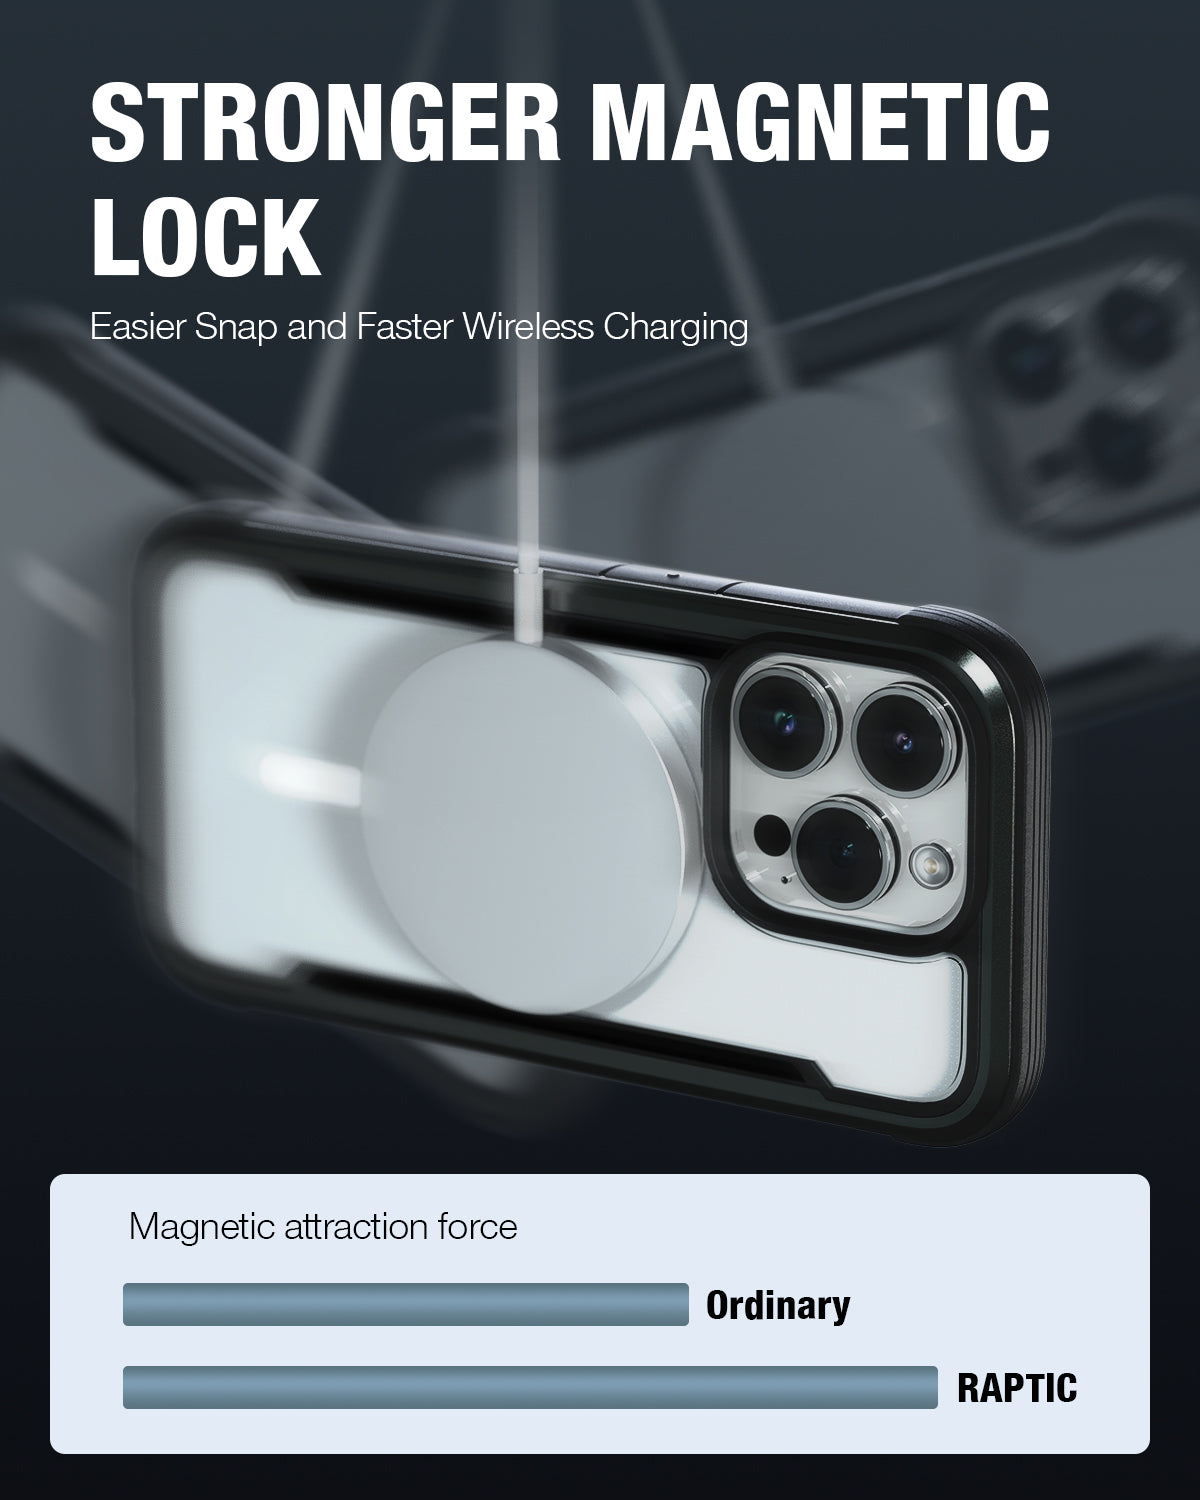 Smartphone with a Raptic iPhone 15 MagSafe Shield case and a magnetic wireless charger attached, emphasizing strong magnetic snap and faster charging, with graphical comparison of magnetic force levels.